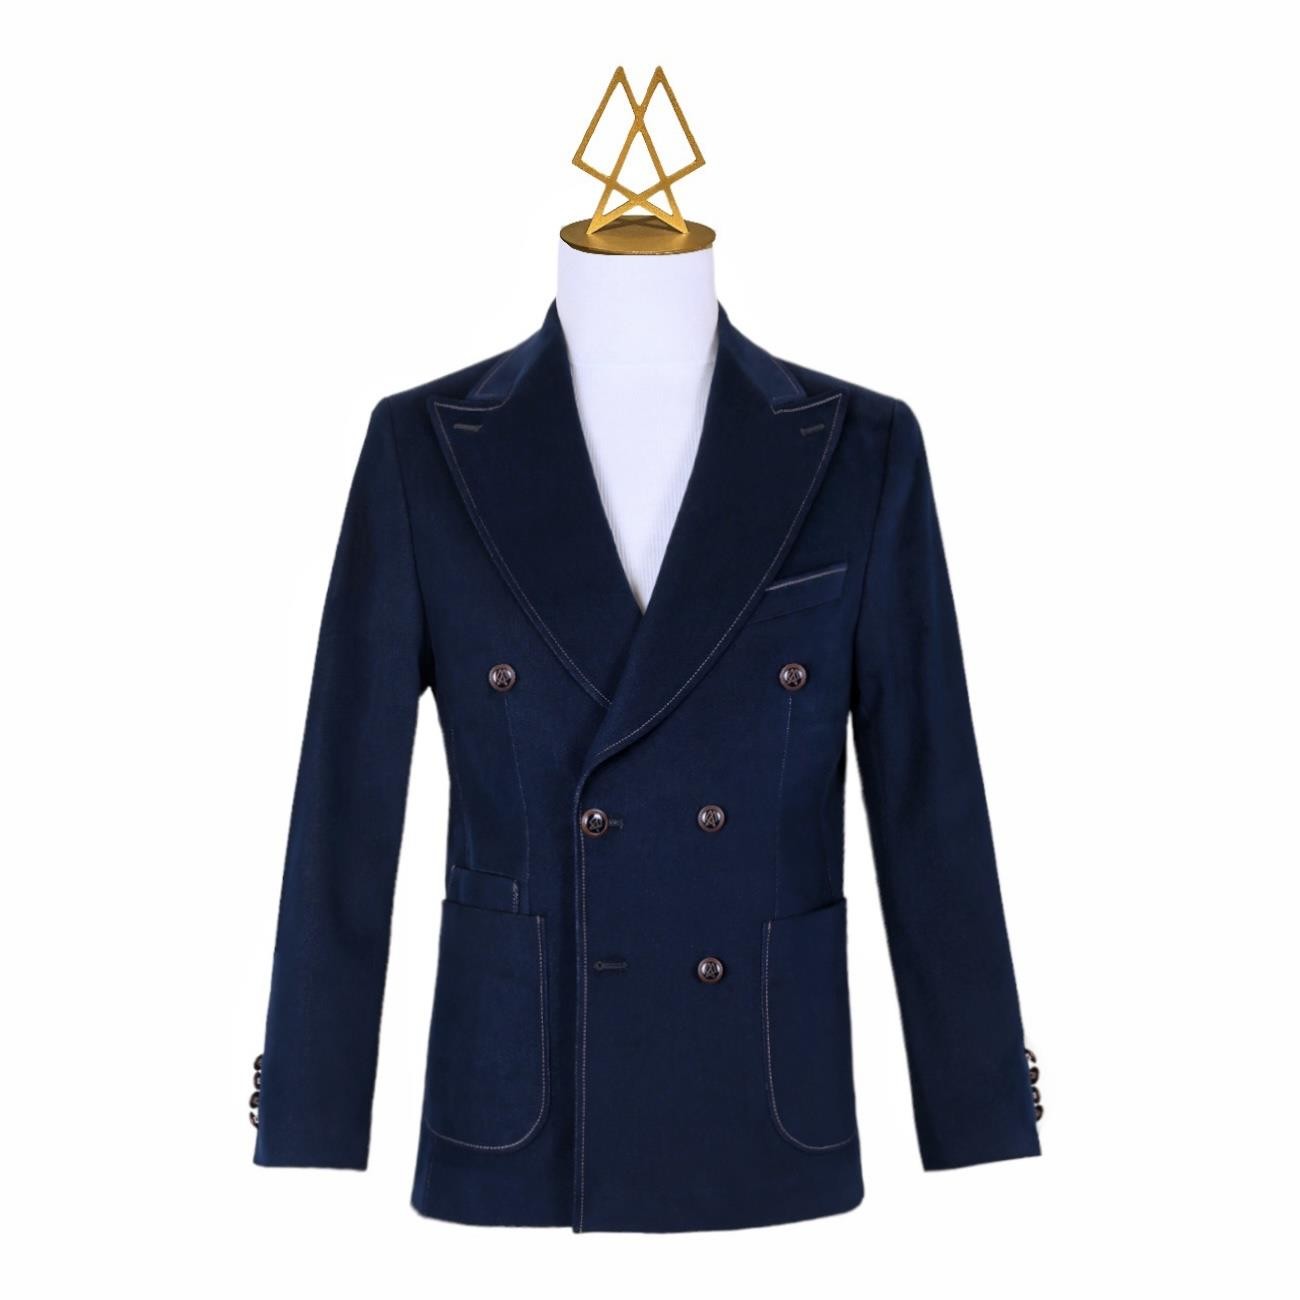 NAVY BLUE DOUBLE BREASTED  DENIM JACKET